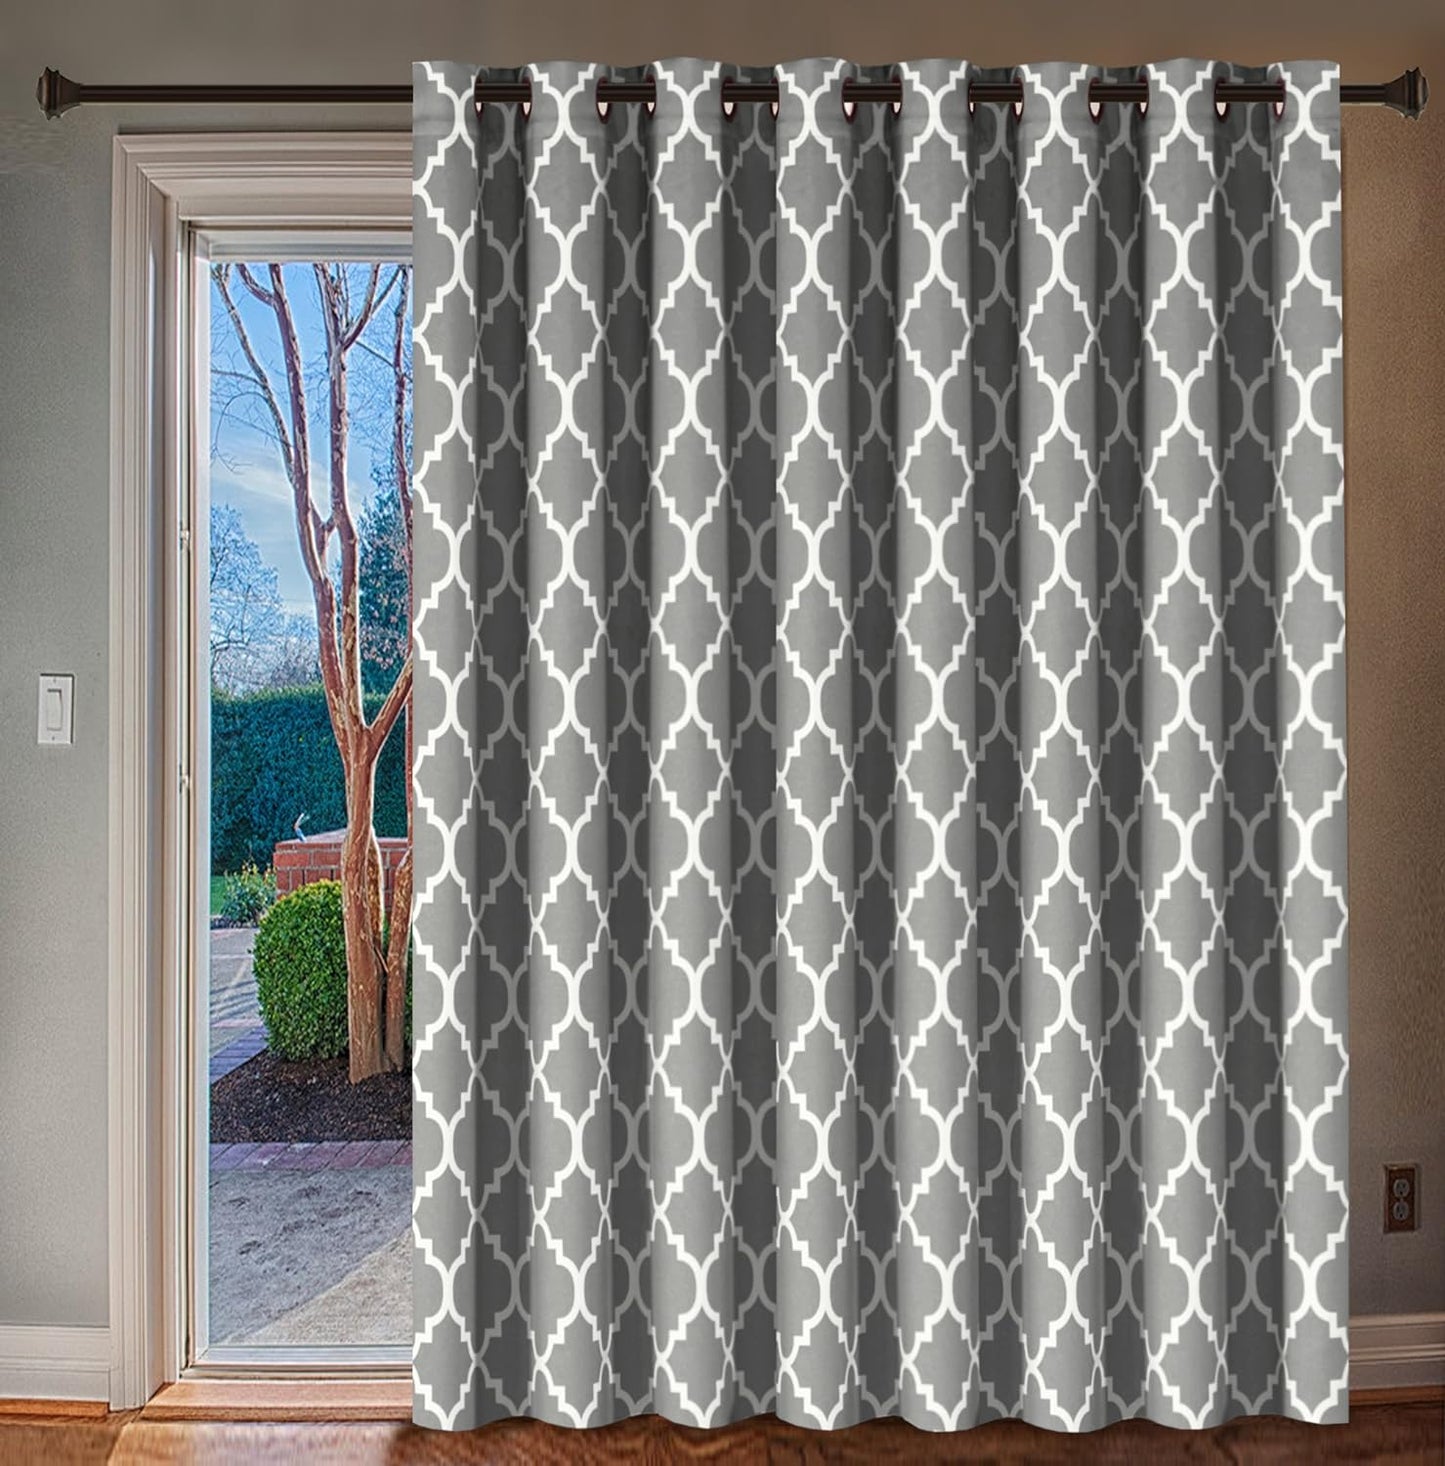 H.VERSAILTEX Extra Wide Blackout Curtain 100X84 Inches Thermal Insulated Curtain for Sliding Glass Door -Grommet Top Patio Door Curtain - Moroccan Tile Quatrefoil Pattern, Dove and White  H.VERSAILTEX Dove  White 100"W X 96"L 